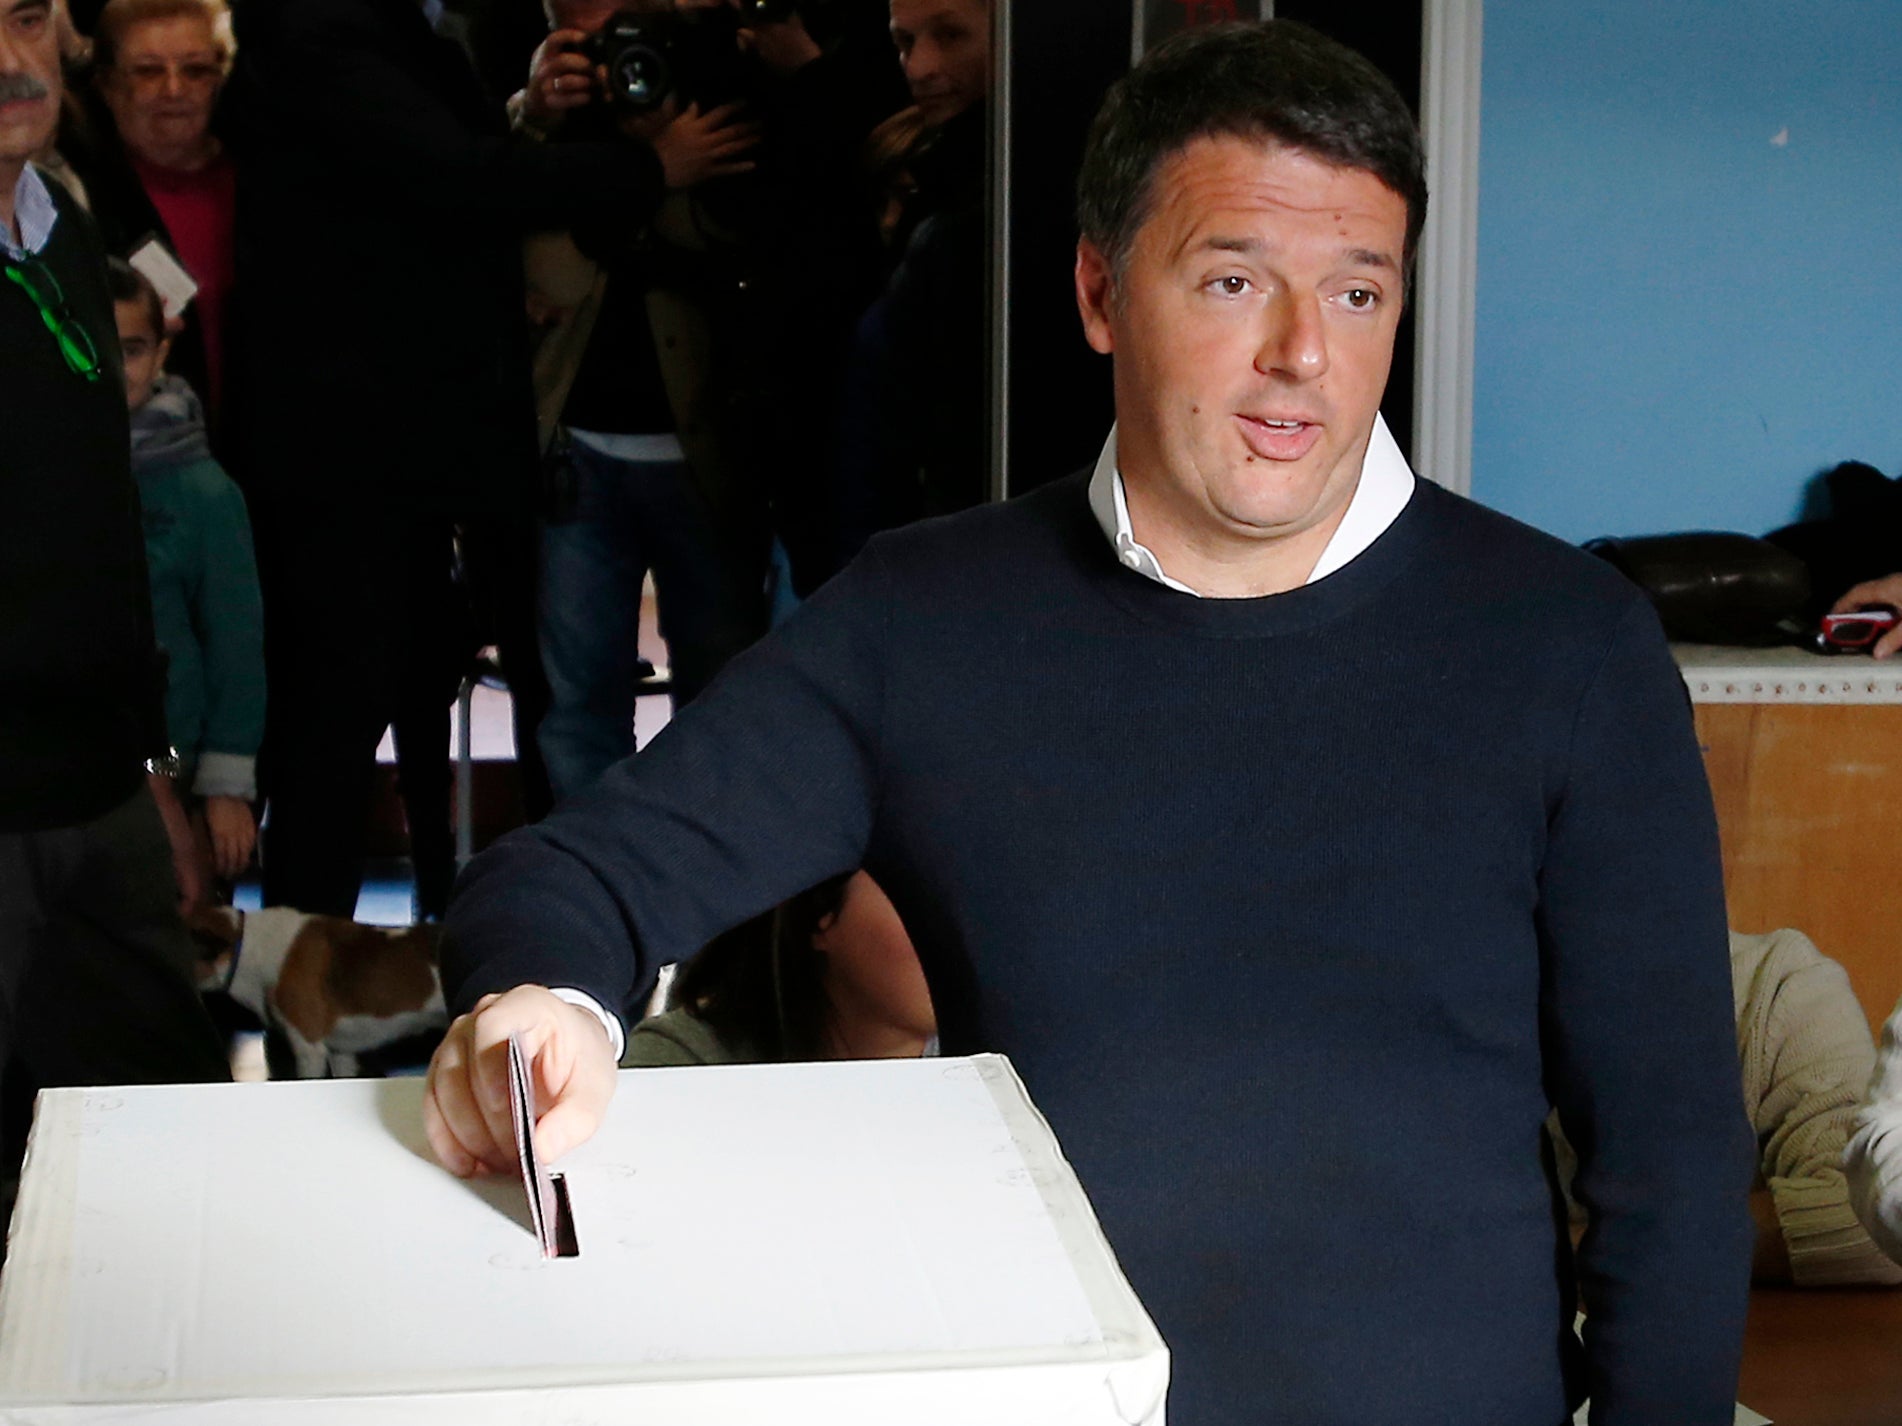 Odds stacked against Renzi, who vows to resign if he loses